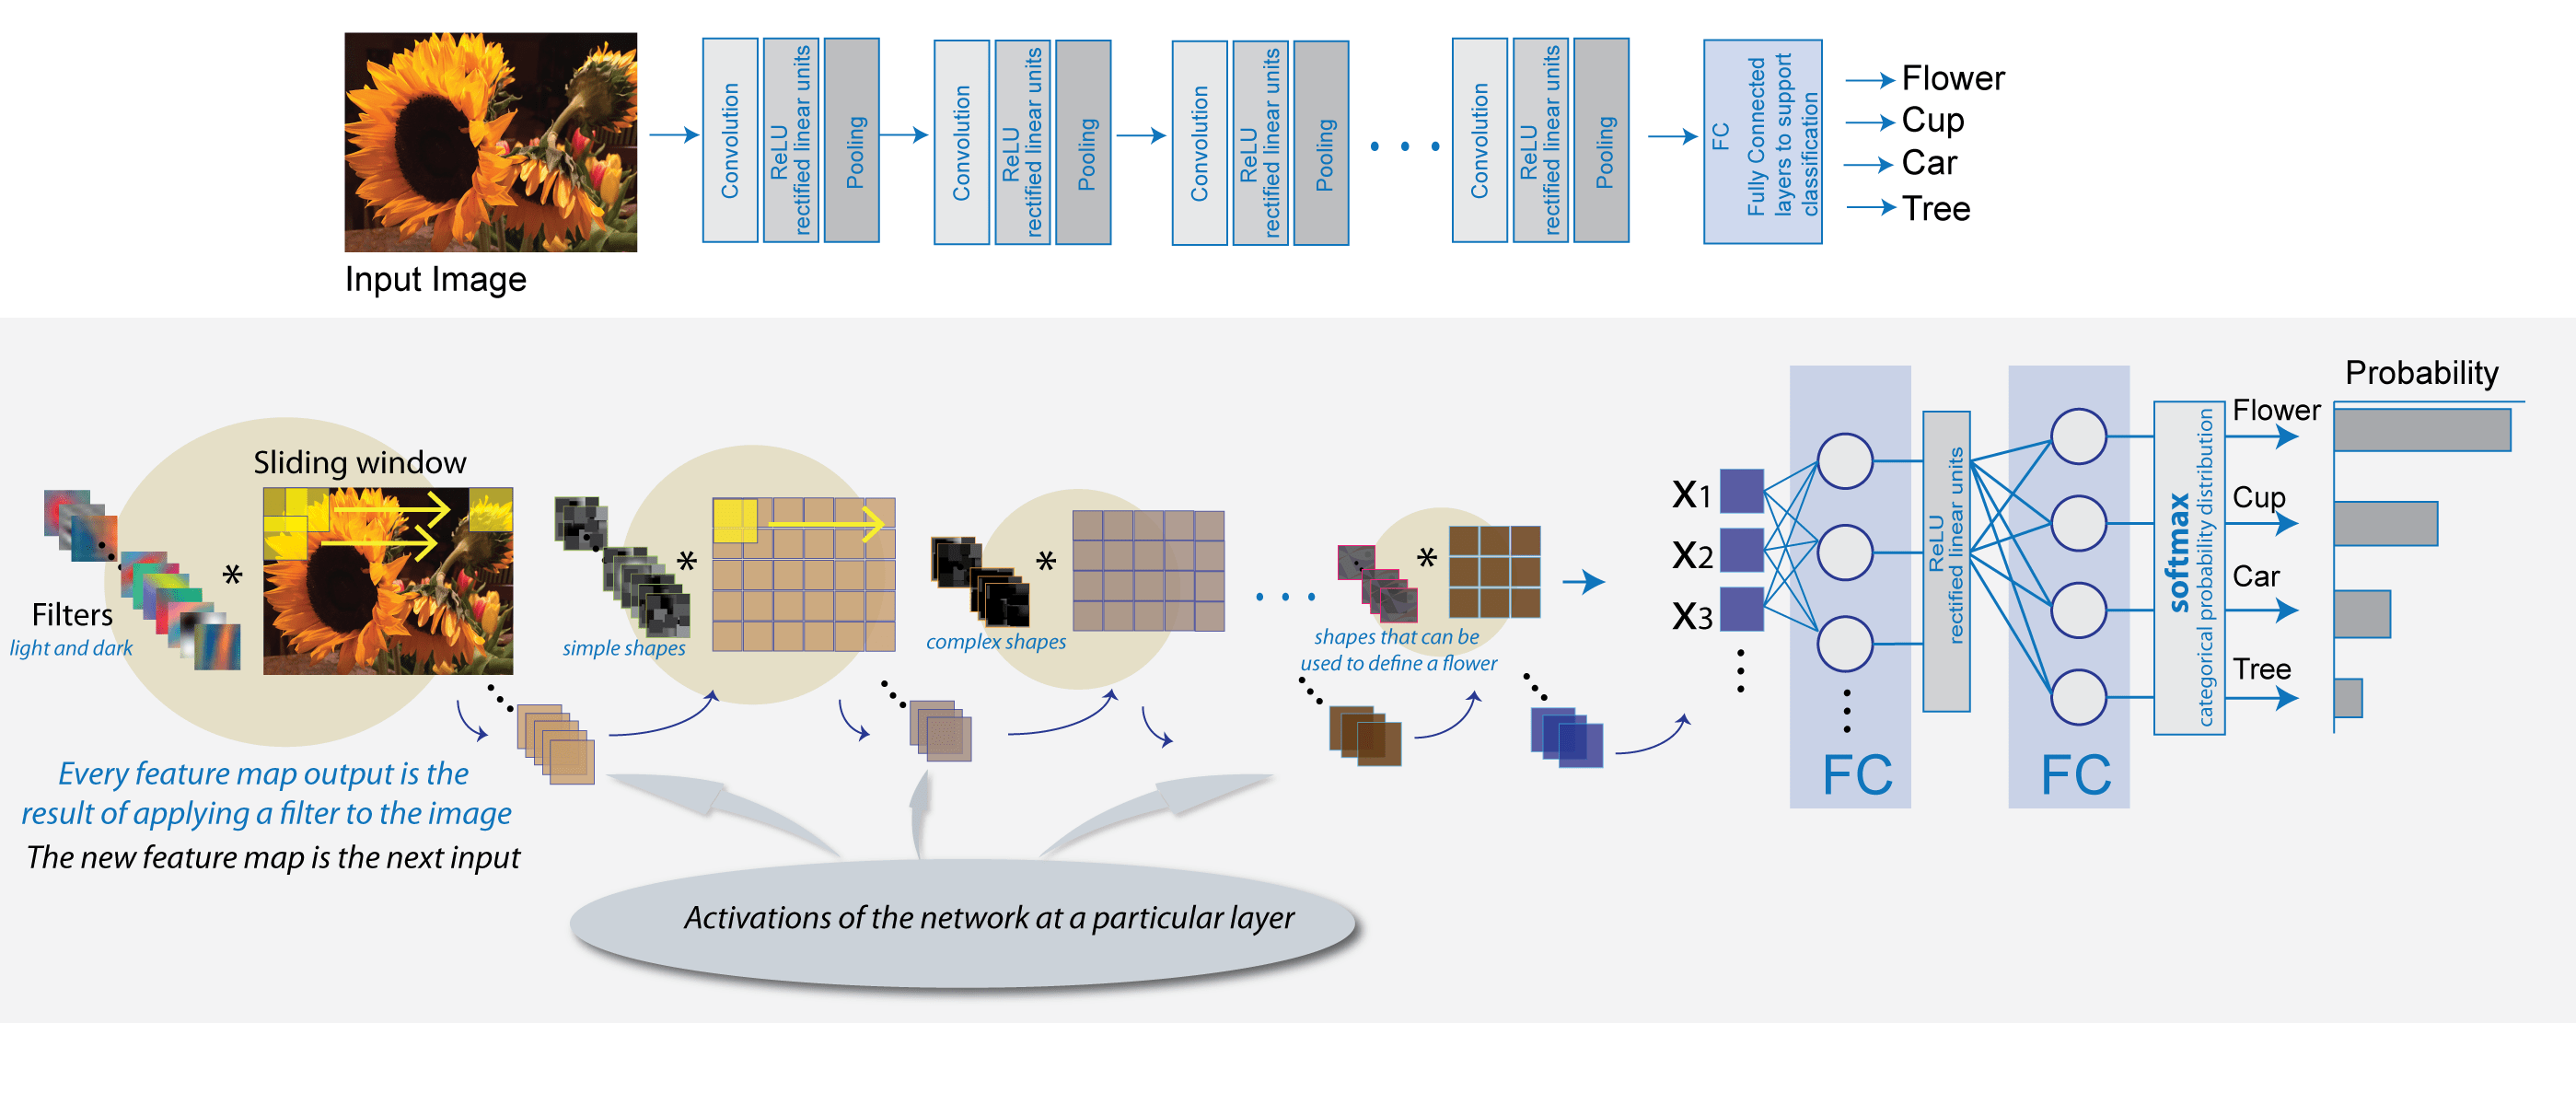 Deep learning architecture diagram. The first image shows an example of a deep learning network architecture. The second image shows an example of how data passes through deep learning layers. As the data passes through the network, the layers learn more complex shapes which combine to create a probability for each class.